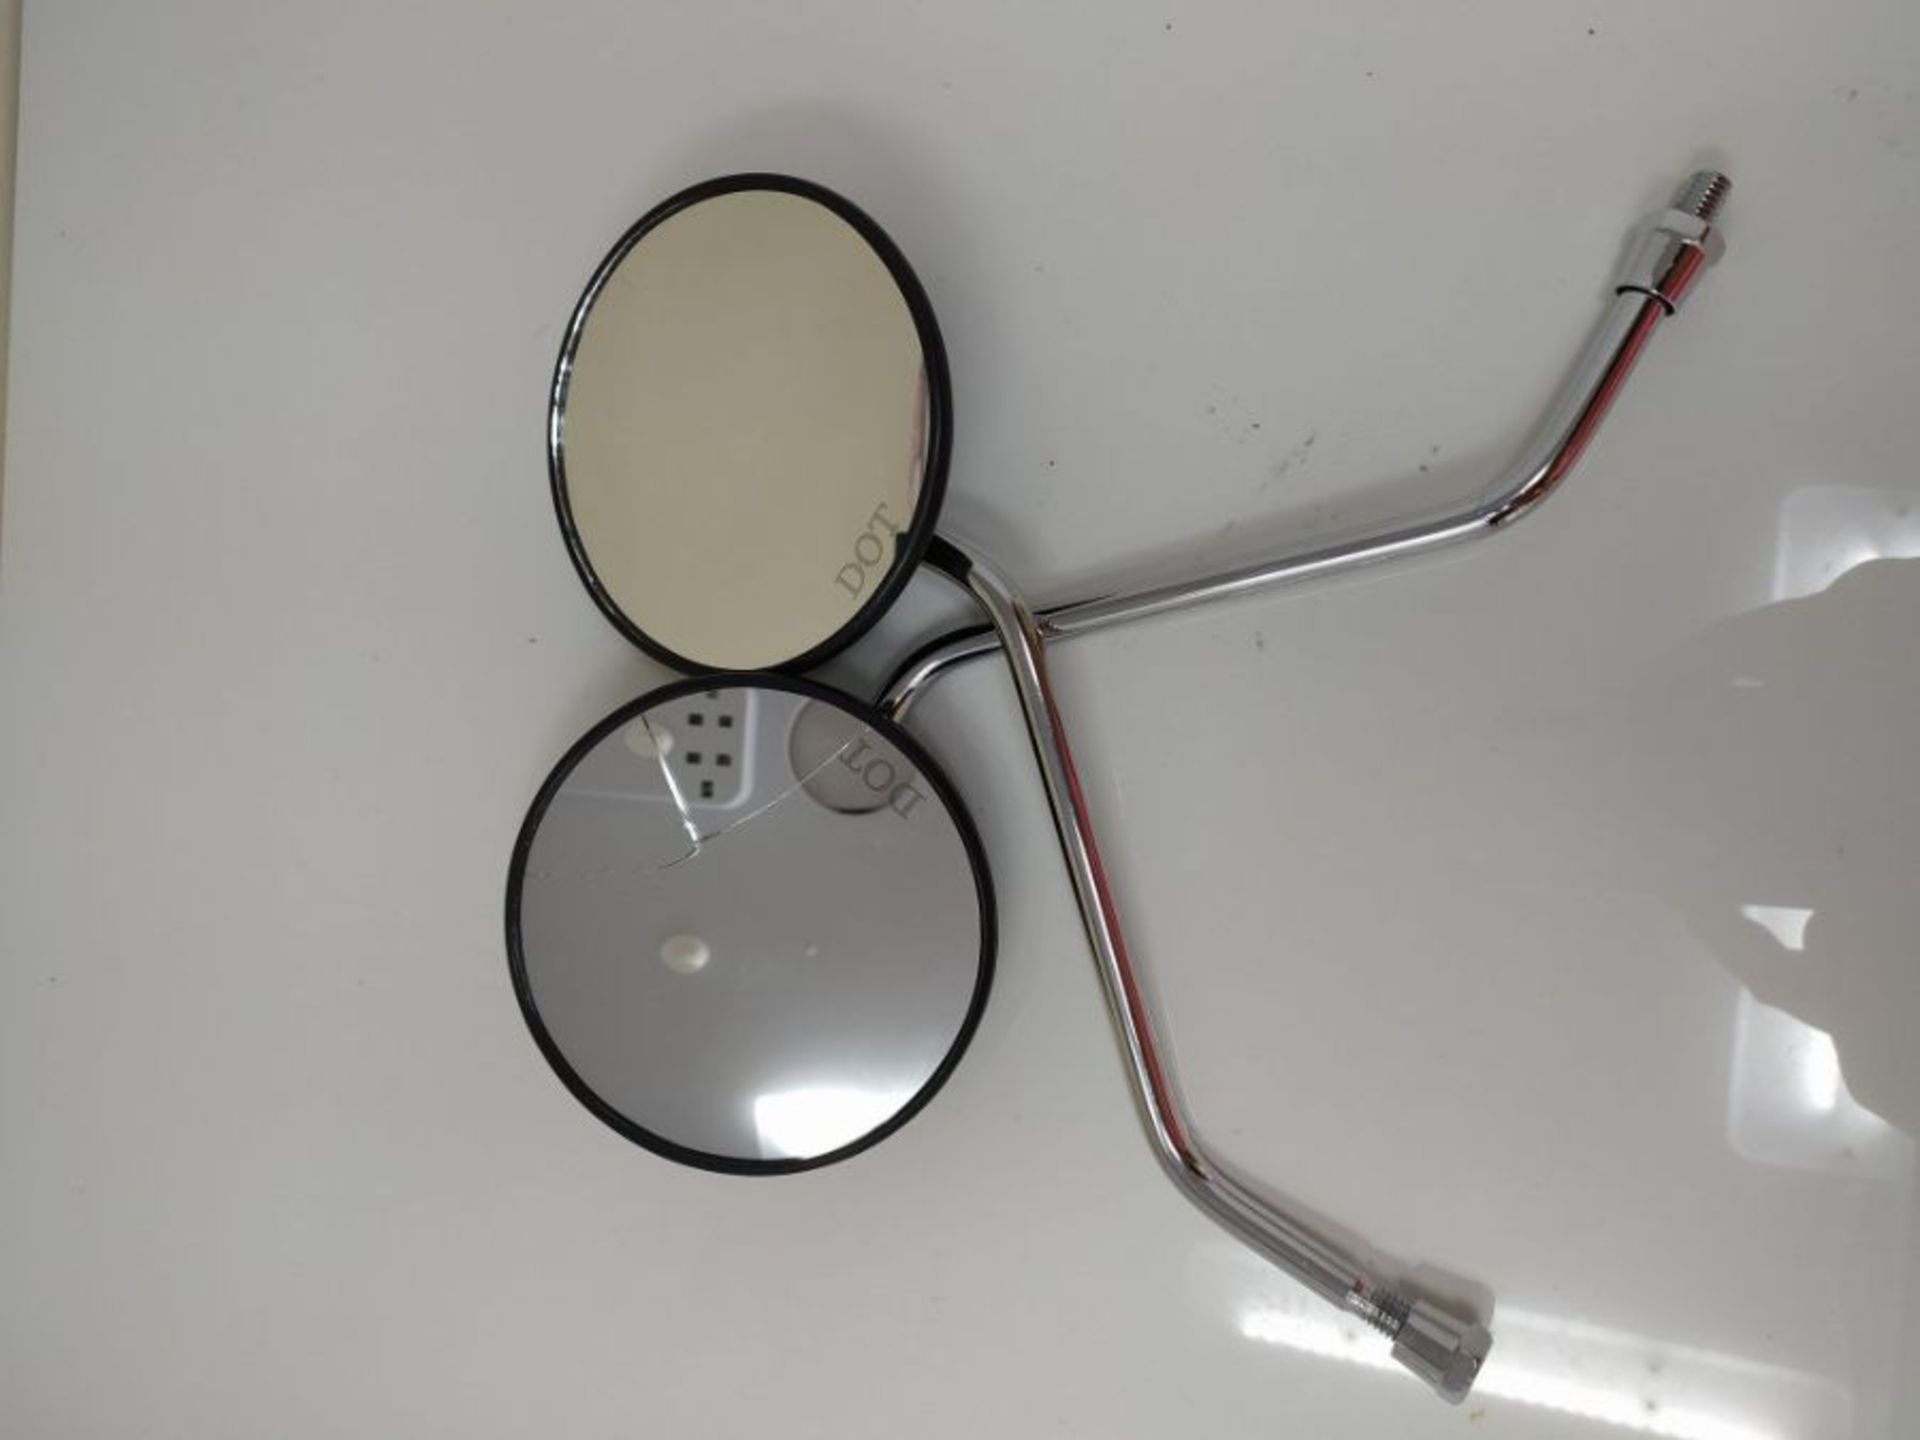 [CRACKED] Scooter Moped Mirrors PAIR - 8mm Clockwise Thread - Universal Fit - Image 2 of 2